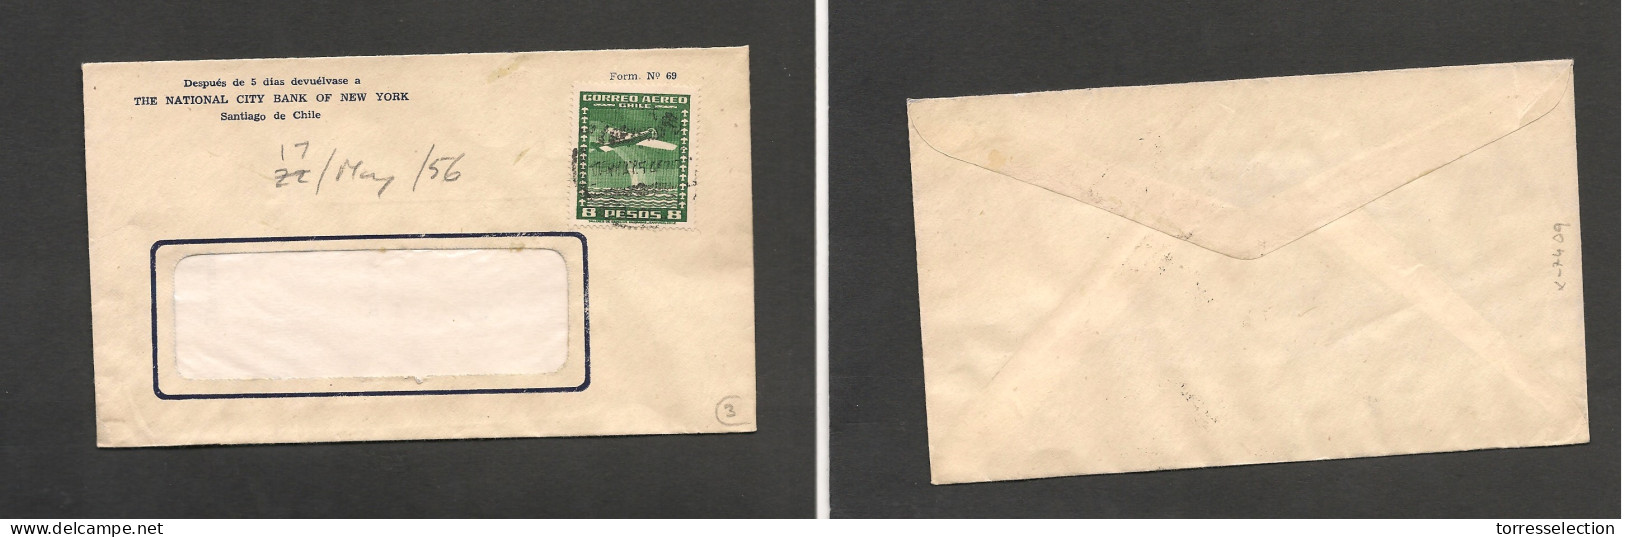 CHILE. Chile - Cover - 1956 17 May Stgo To USA? Fkd Env Air 8 Pesos Rate. Ex-Prof West UK Airmails Coll.- . Easy Deal. - Chile